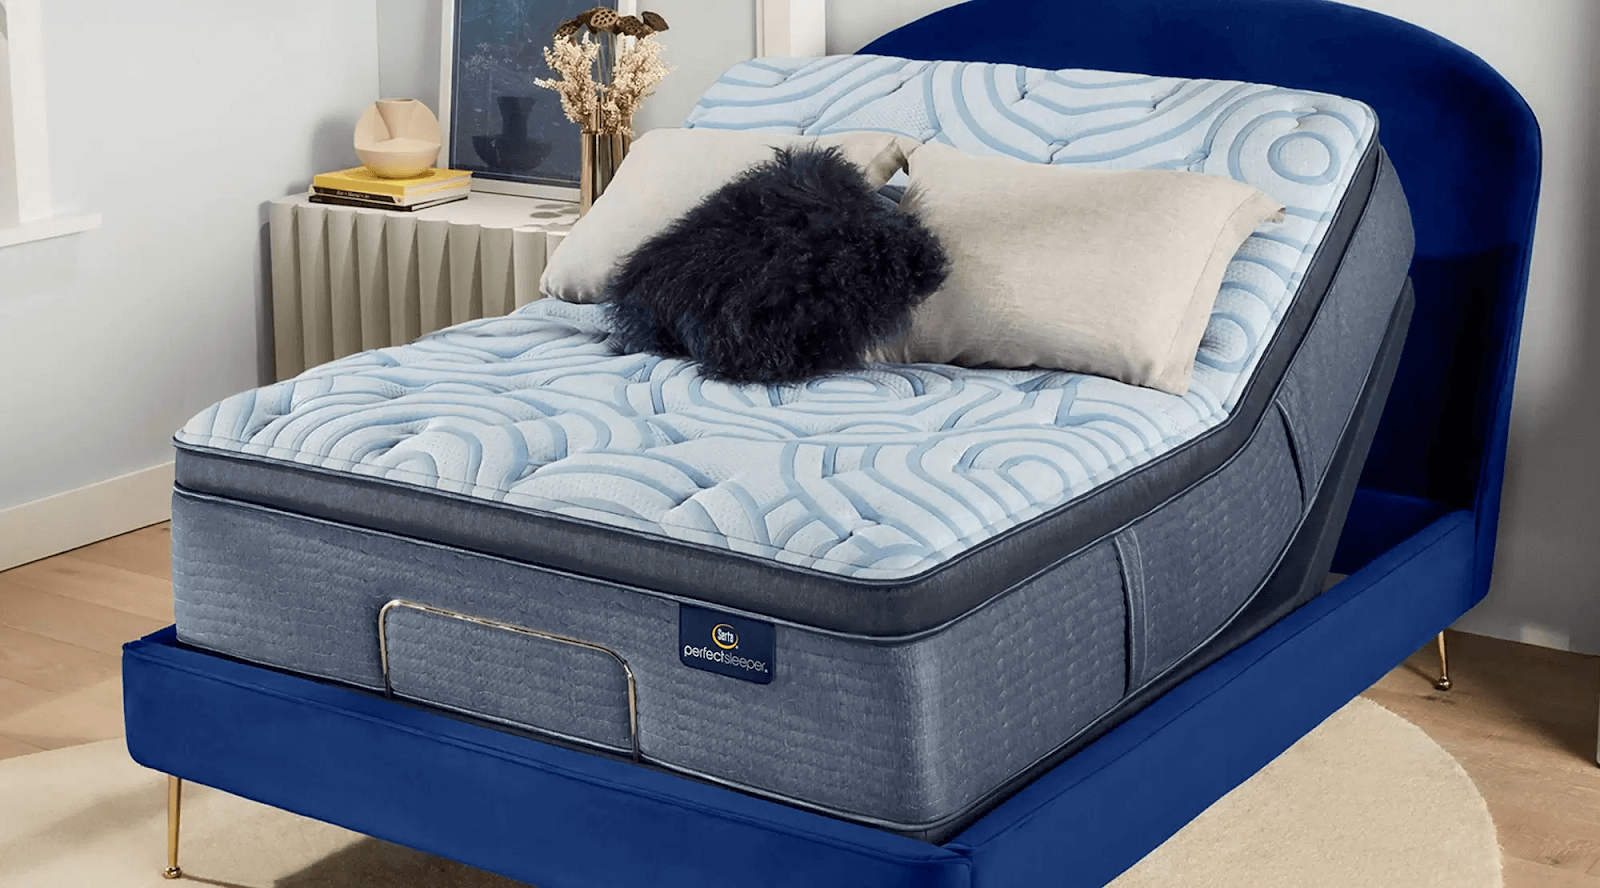 Serta mattresses are made in the USA instead of China